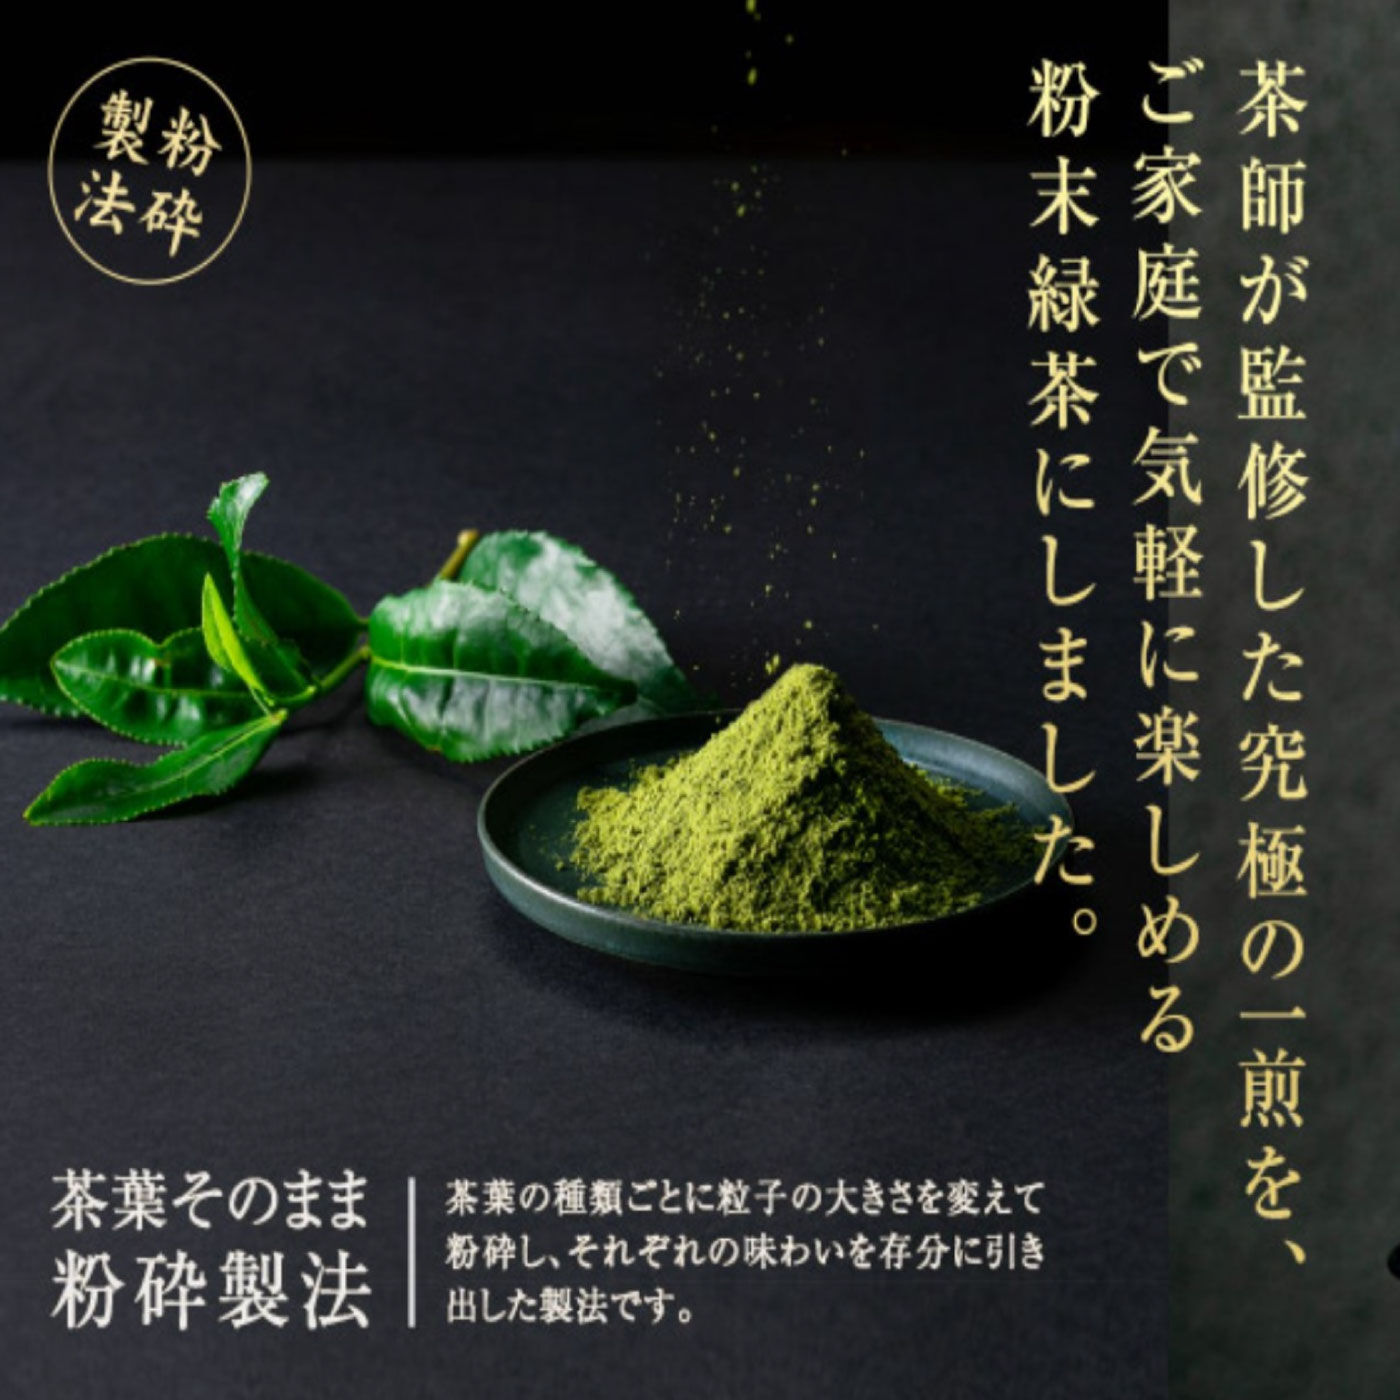 FELISSIMO PARTNERS|茶師 辻重行の一煎　粉末緑茶　詰め替え３袋の会